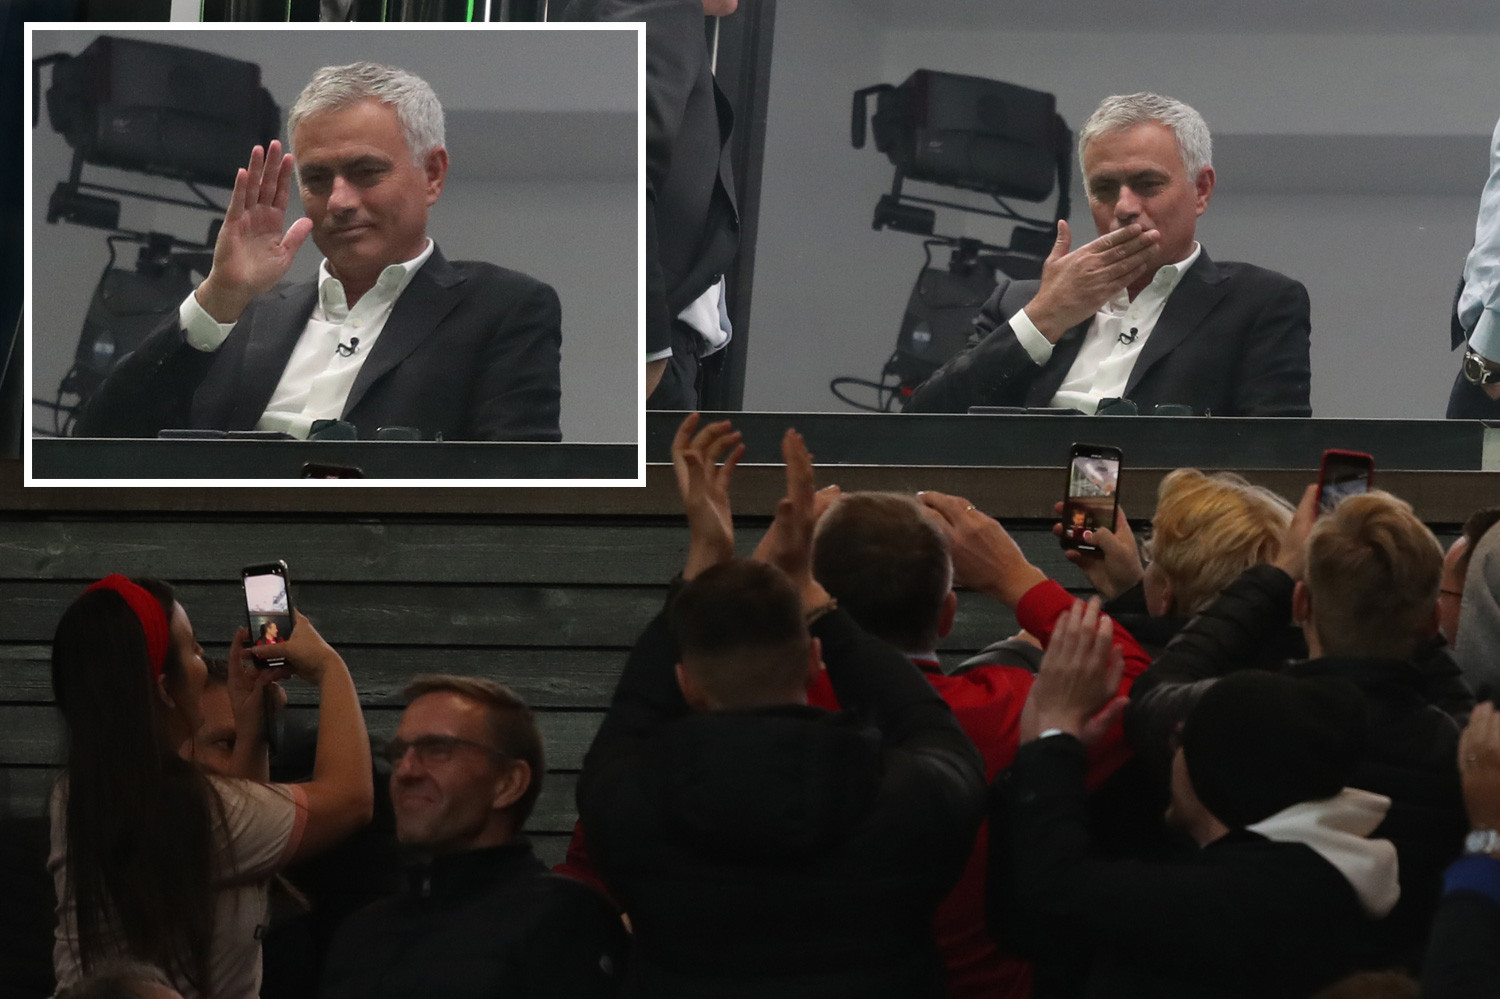 Jose Mourinho gestures to Man Utd fans at Old Trafford after they sing his name - Bóng Đá